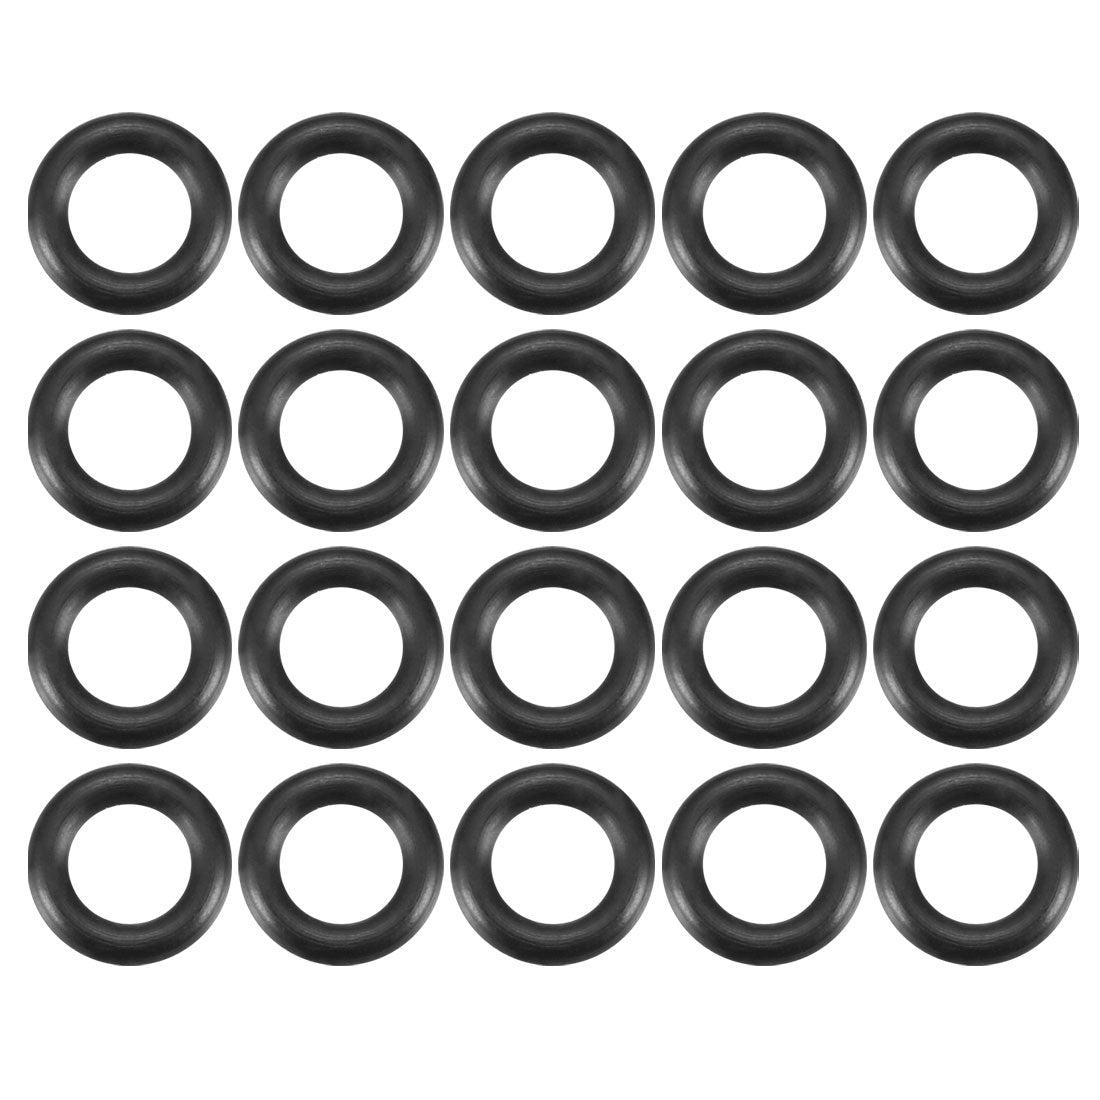 uxcell Uxcell 20Pcs 9mm x 1.9mm Rubber O-rings NBR Heat Resistant Sealing Ring Grommets Black